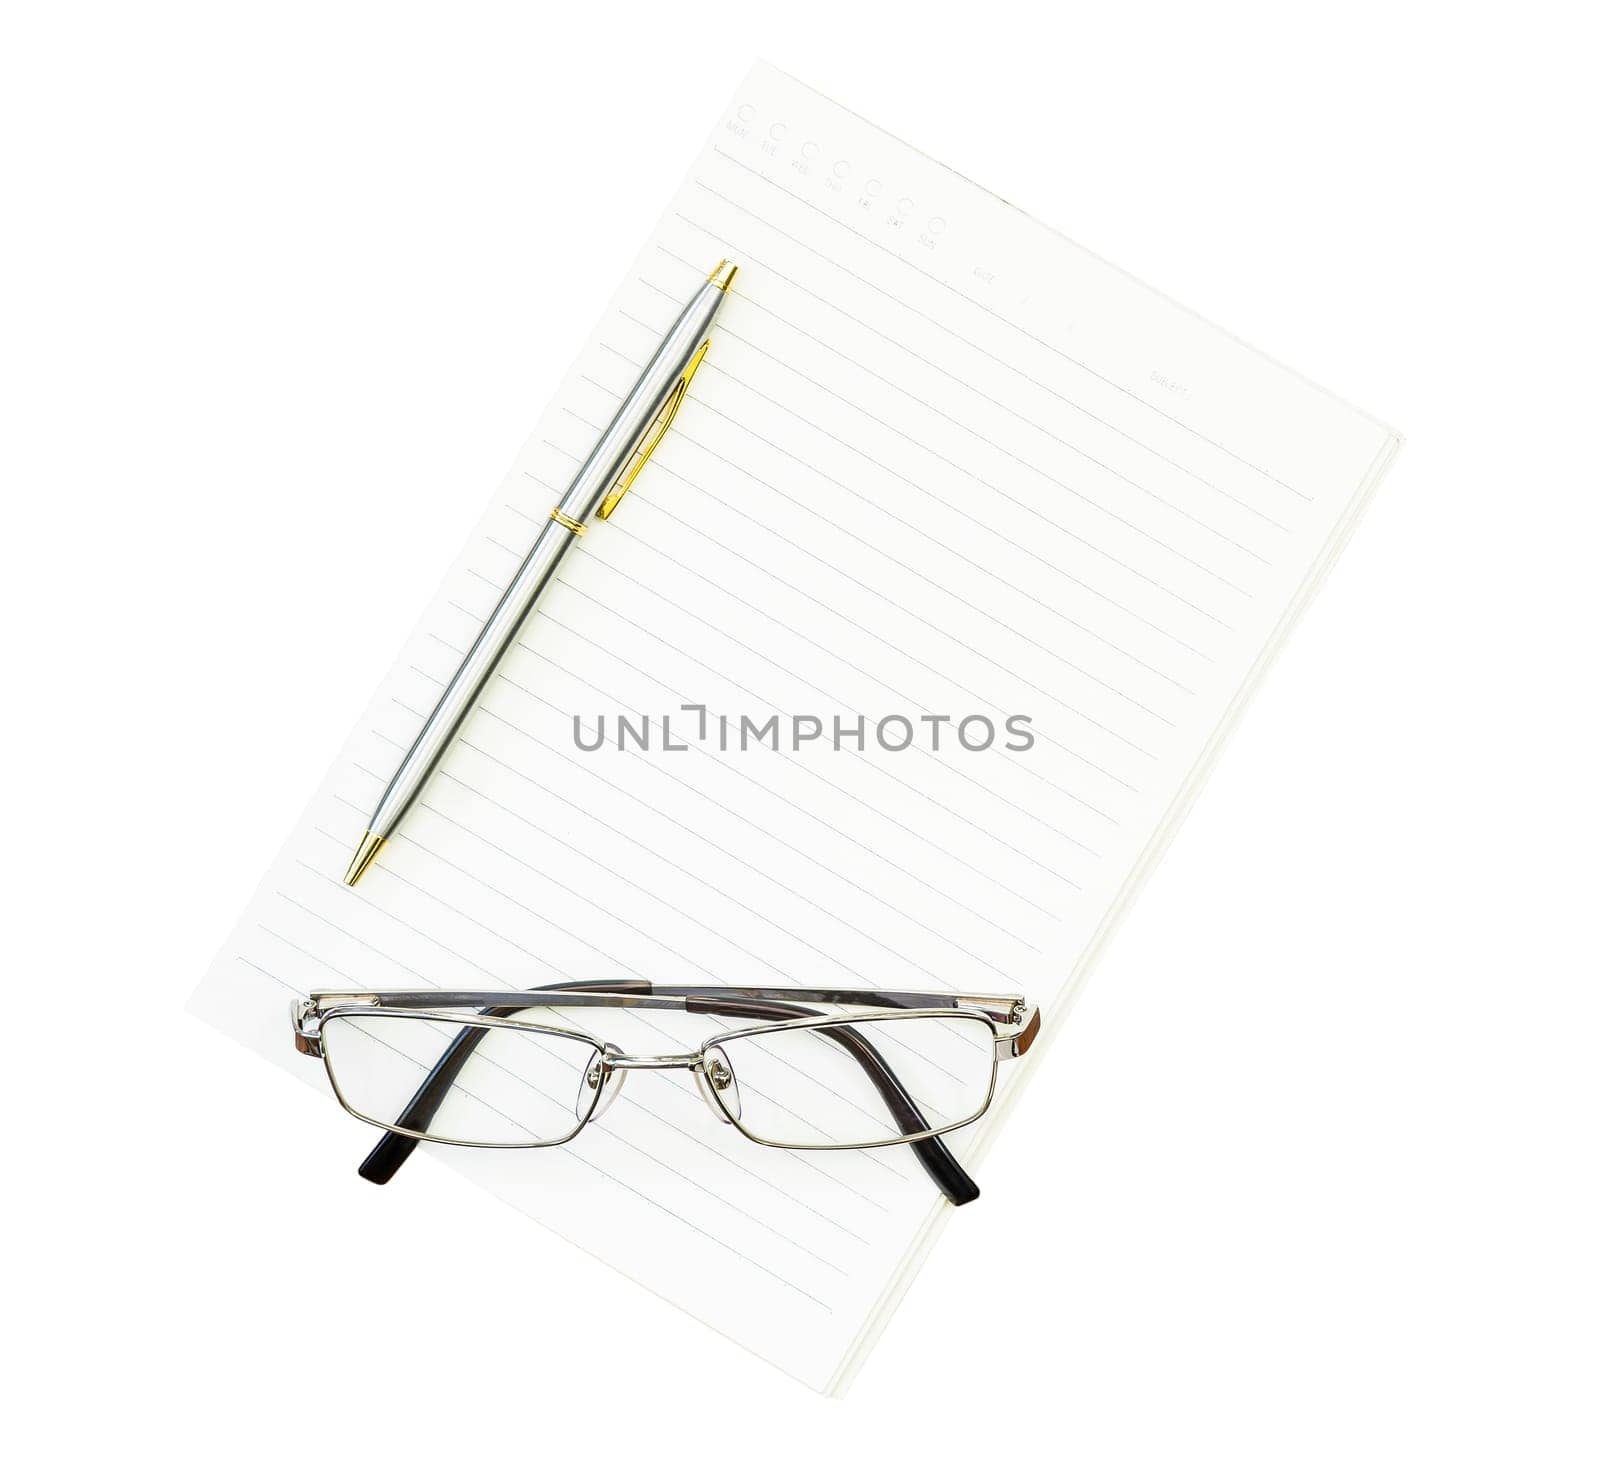 Eyeglasses and notepad on white background by stoonn